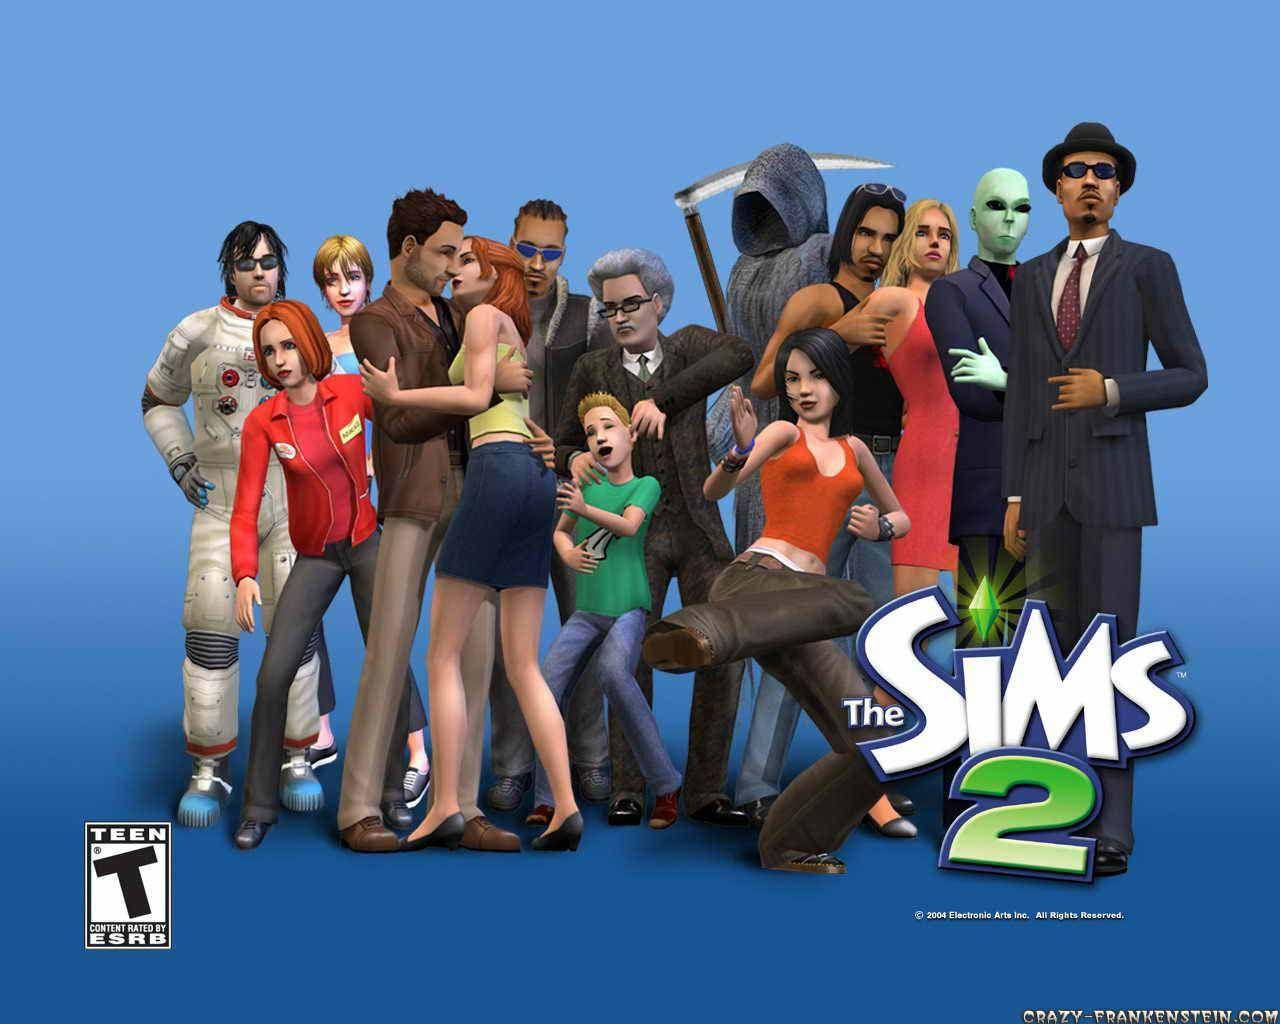 The Sims On Blue